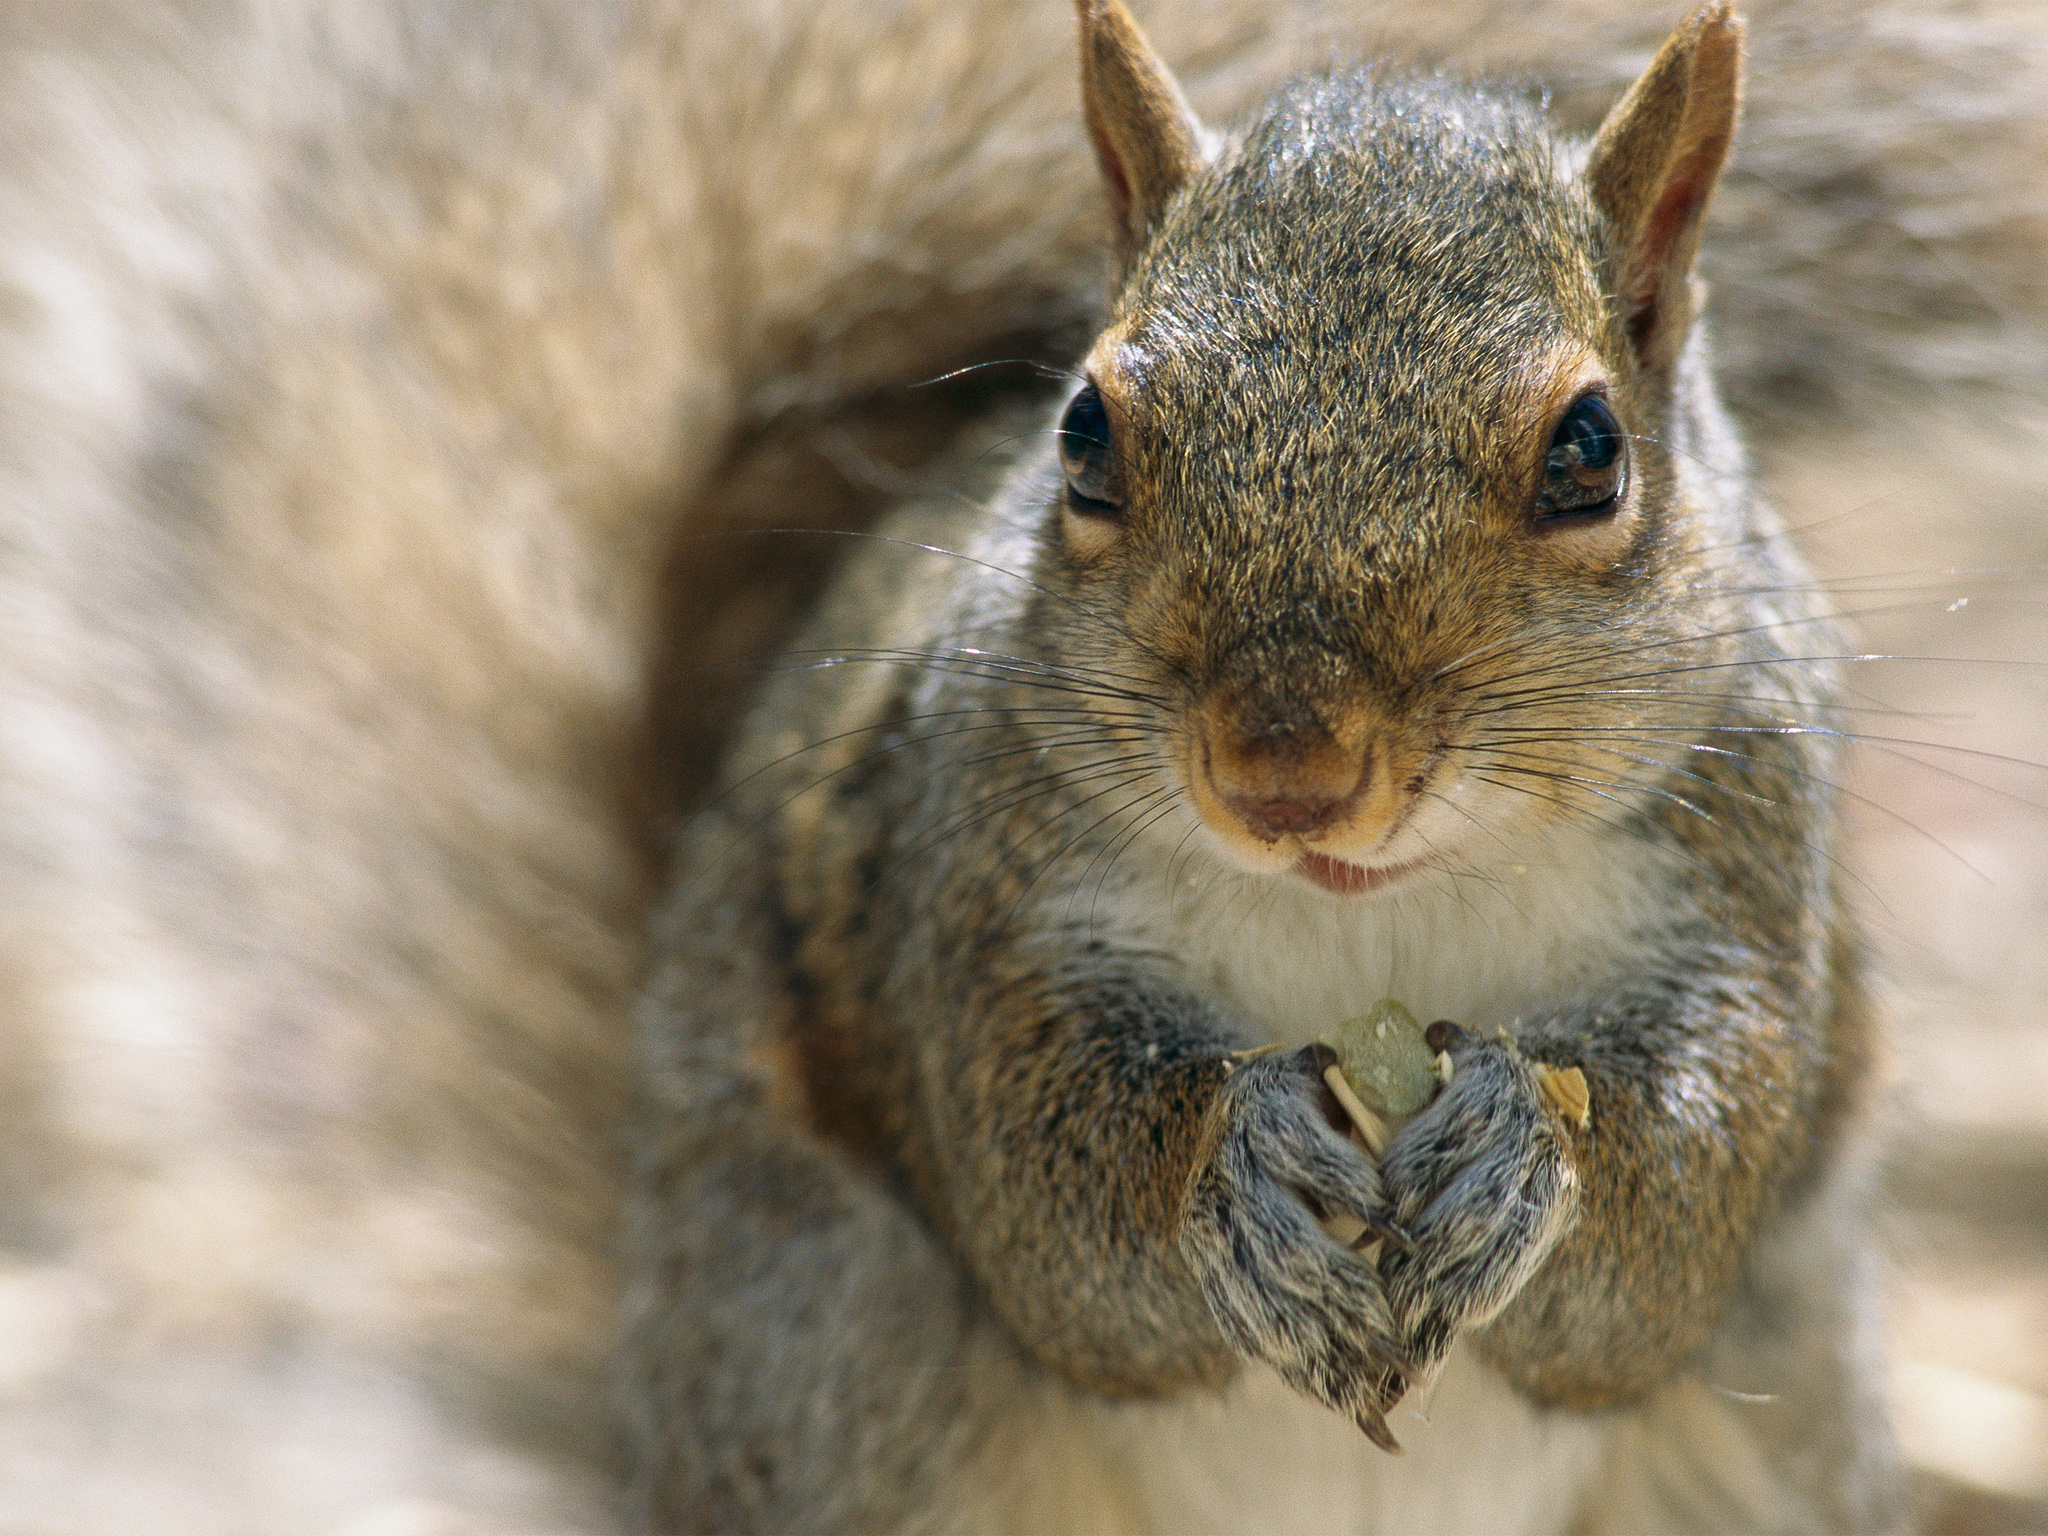 Squirrel Birth Control: To Stop Invasion, Science Gets Seedy